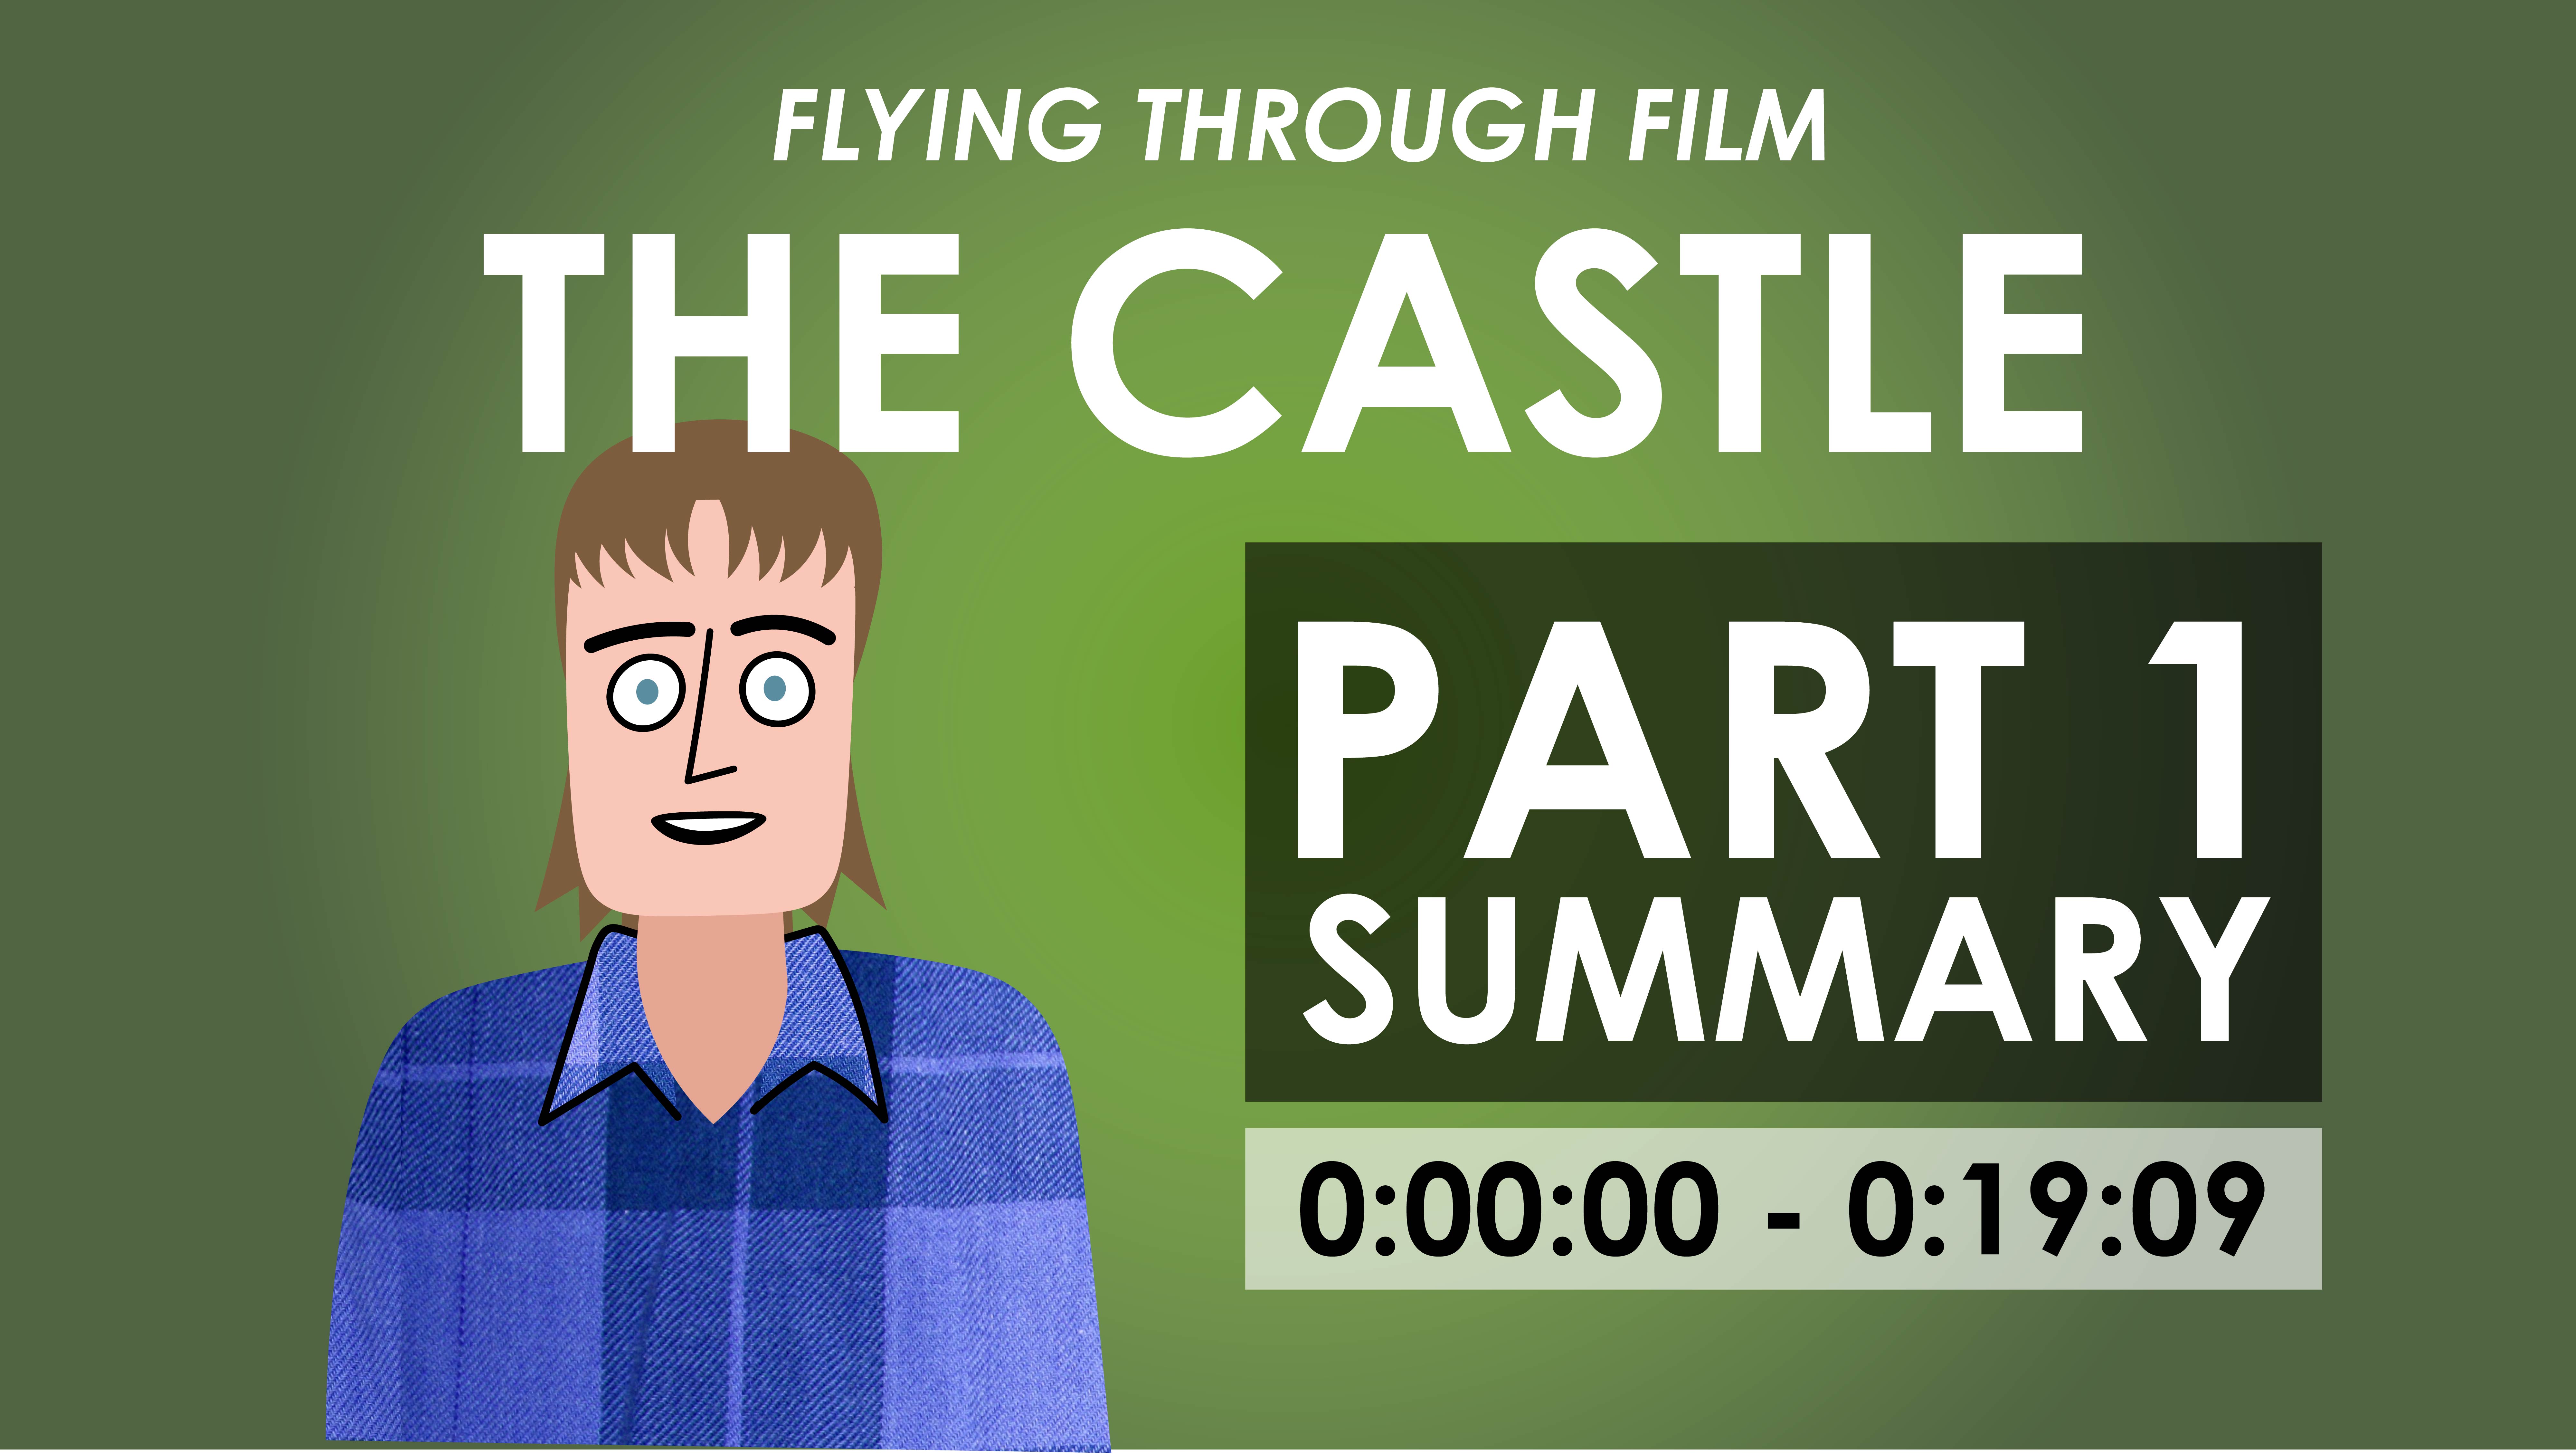 The Castle - Part 1 Summary (0:00:00-0:19:09) - Flying Through Film Series